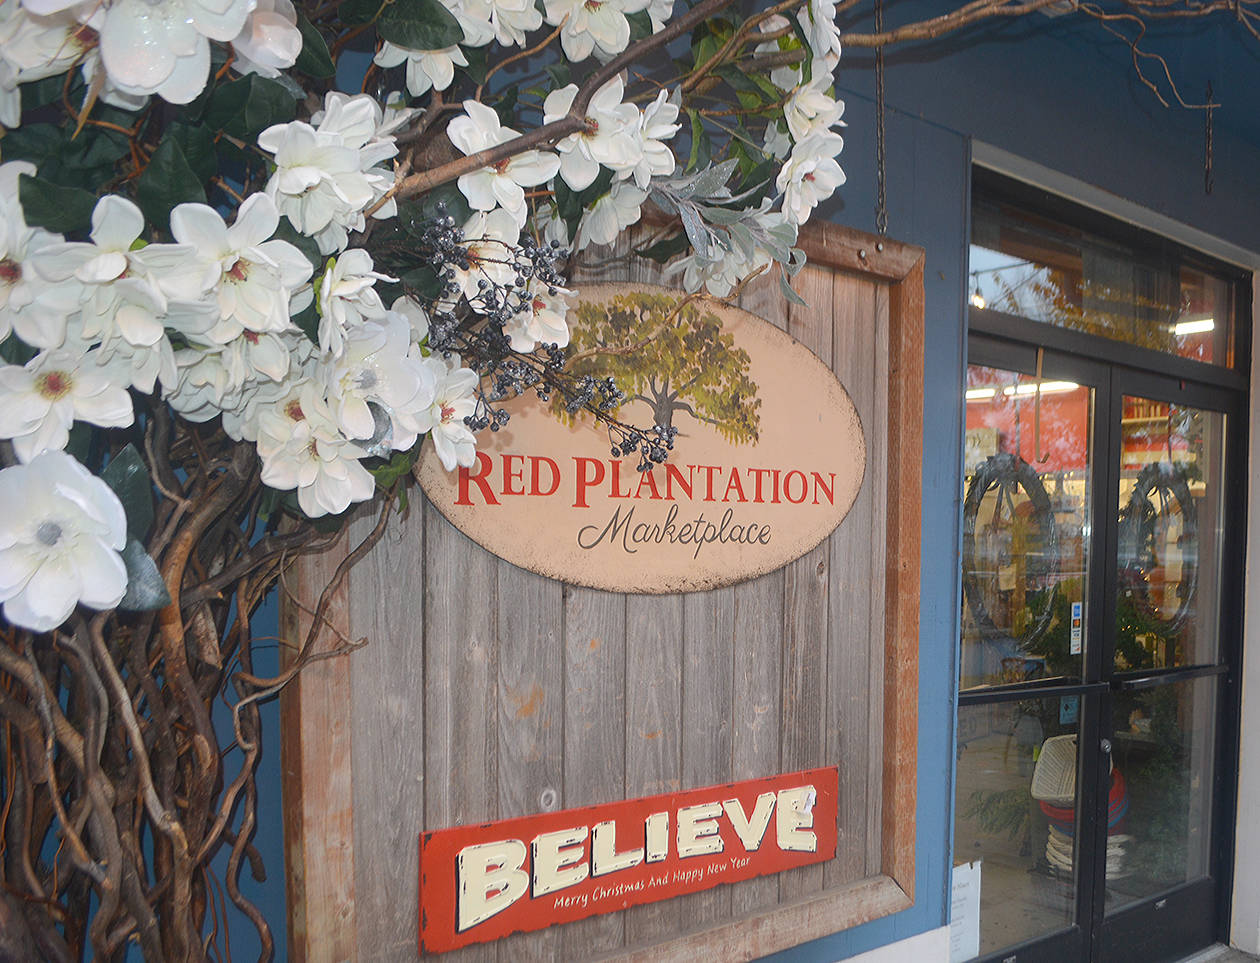 The outside of the Red Plantation.